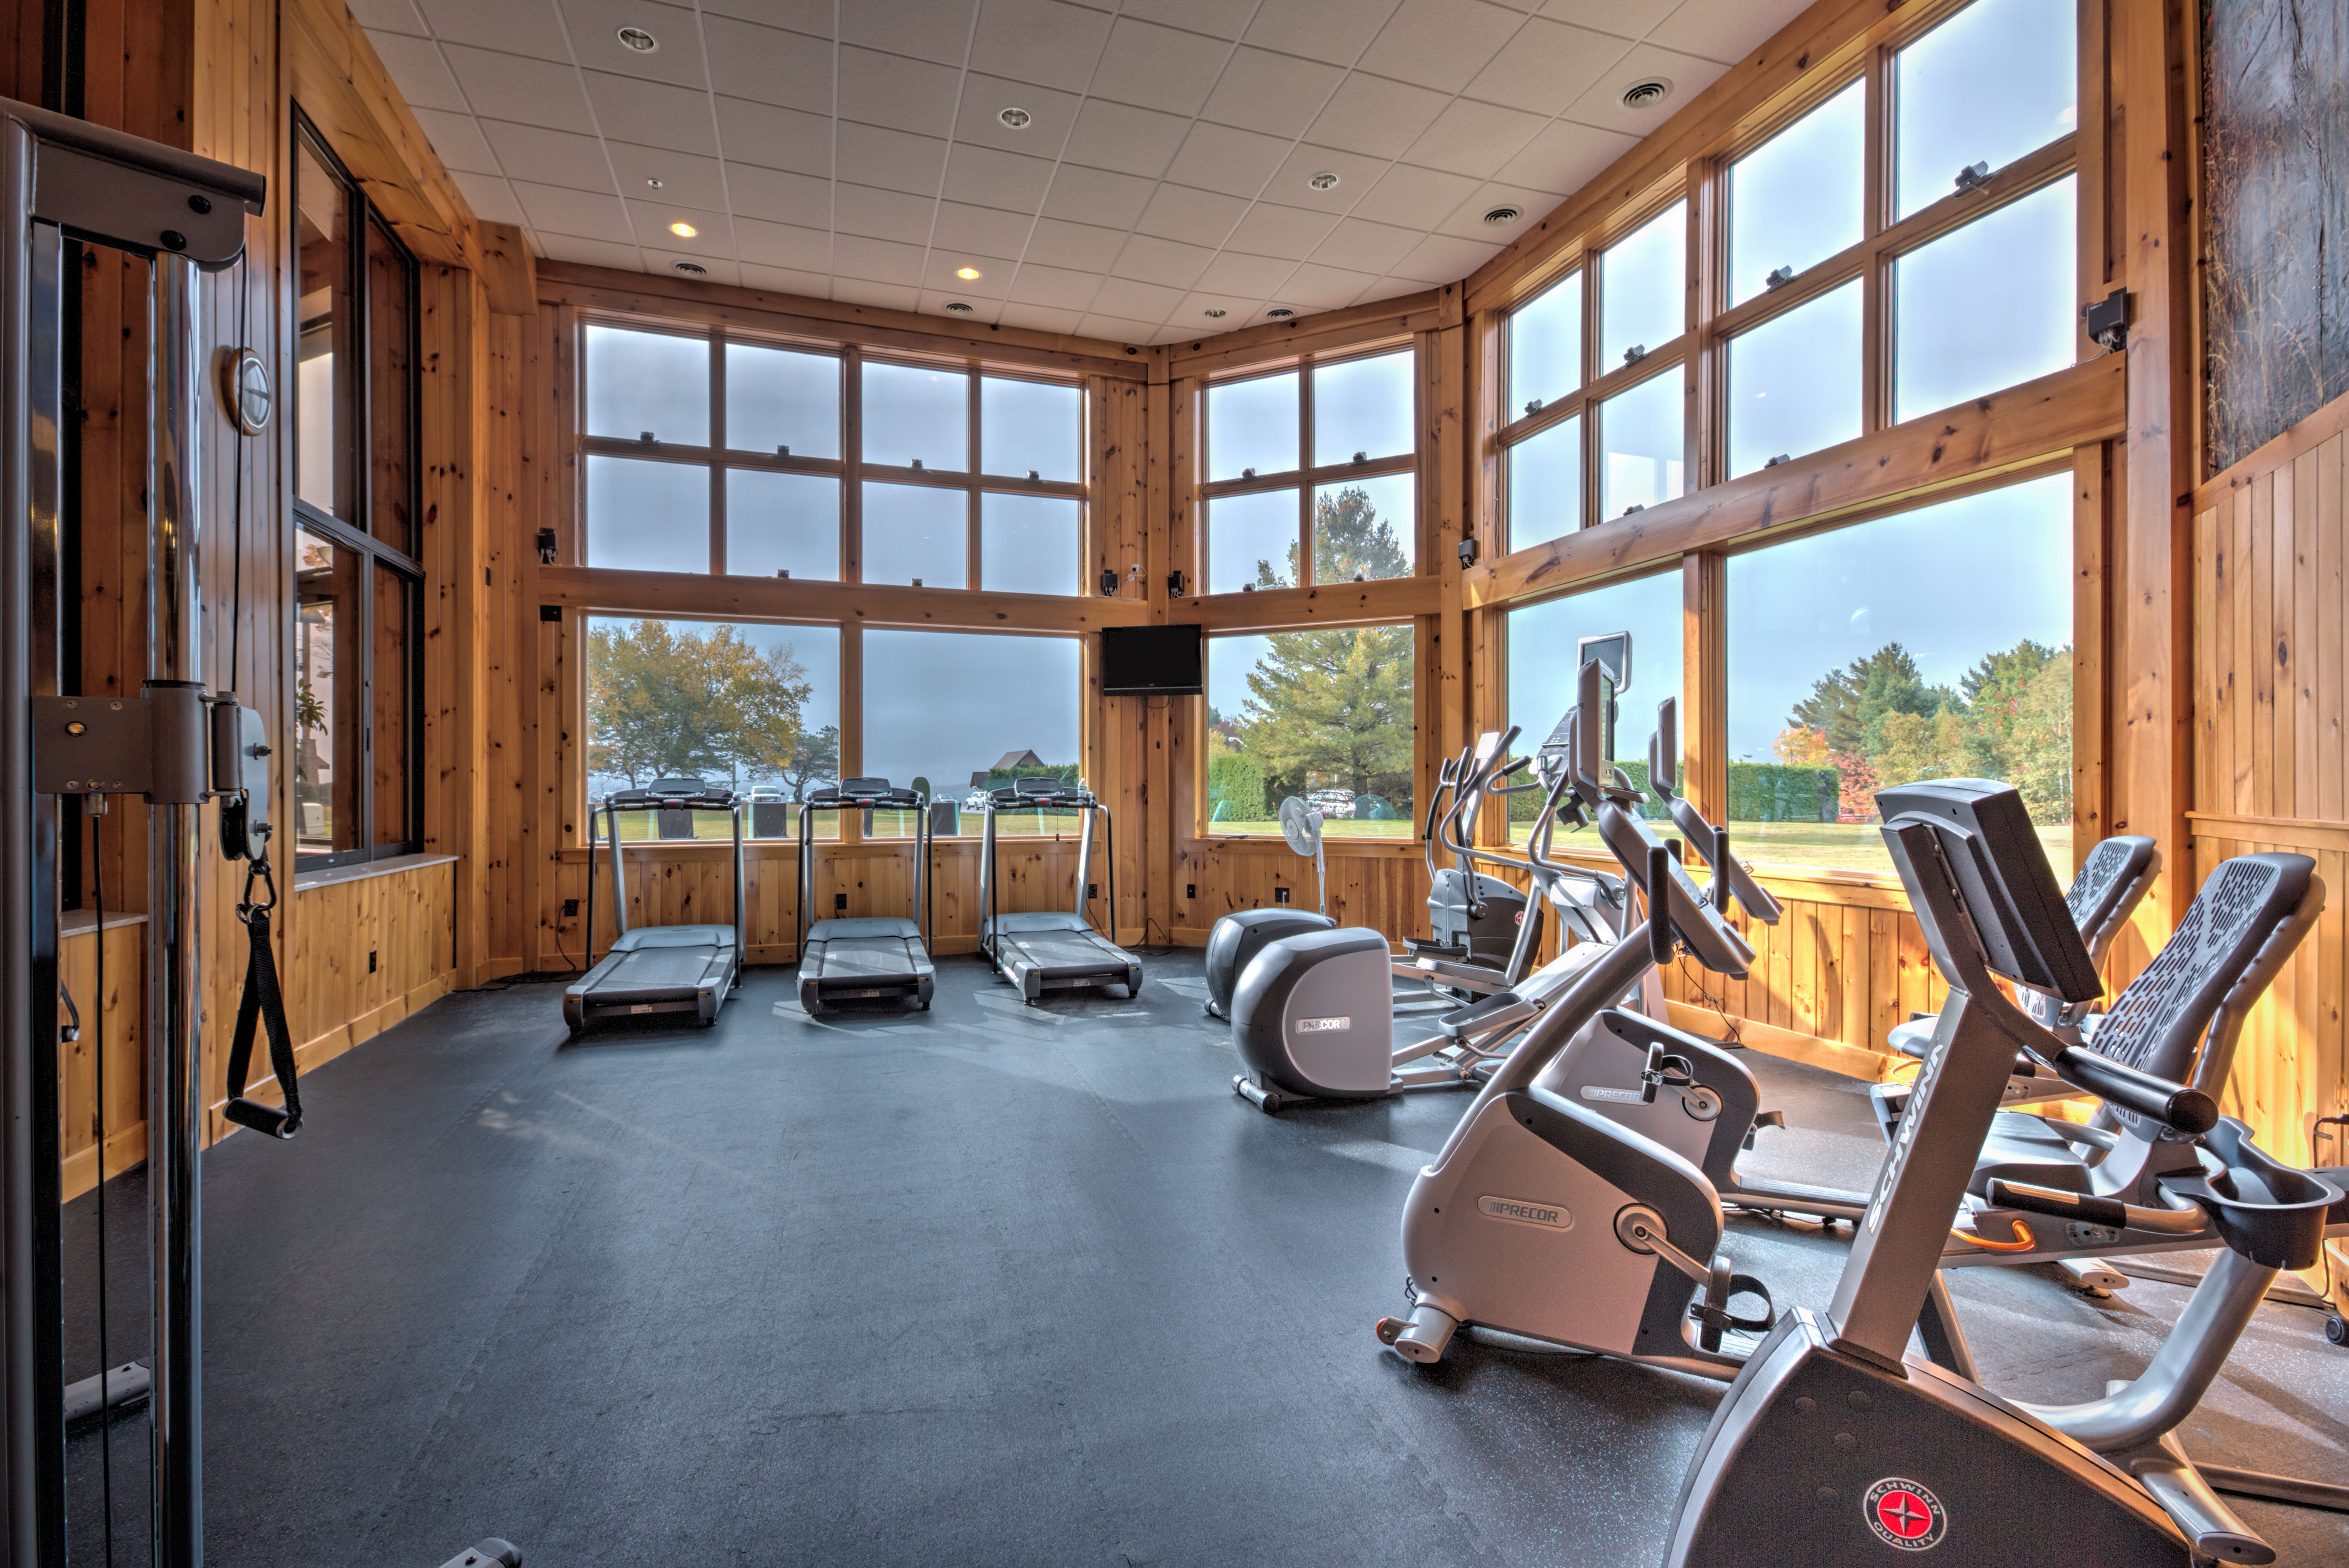 Our fitness center offers cardio with a view